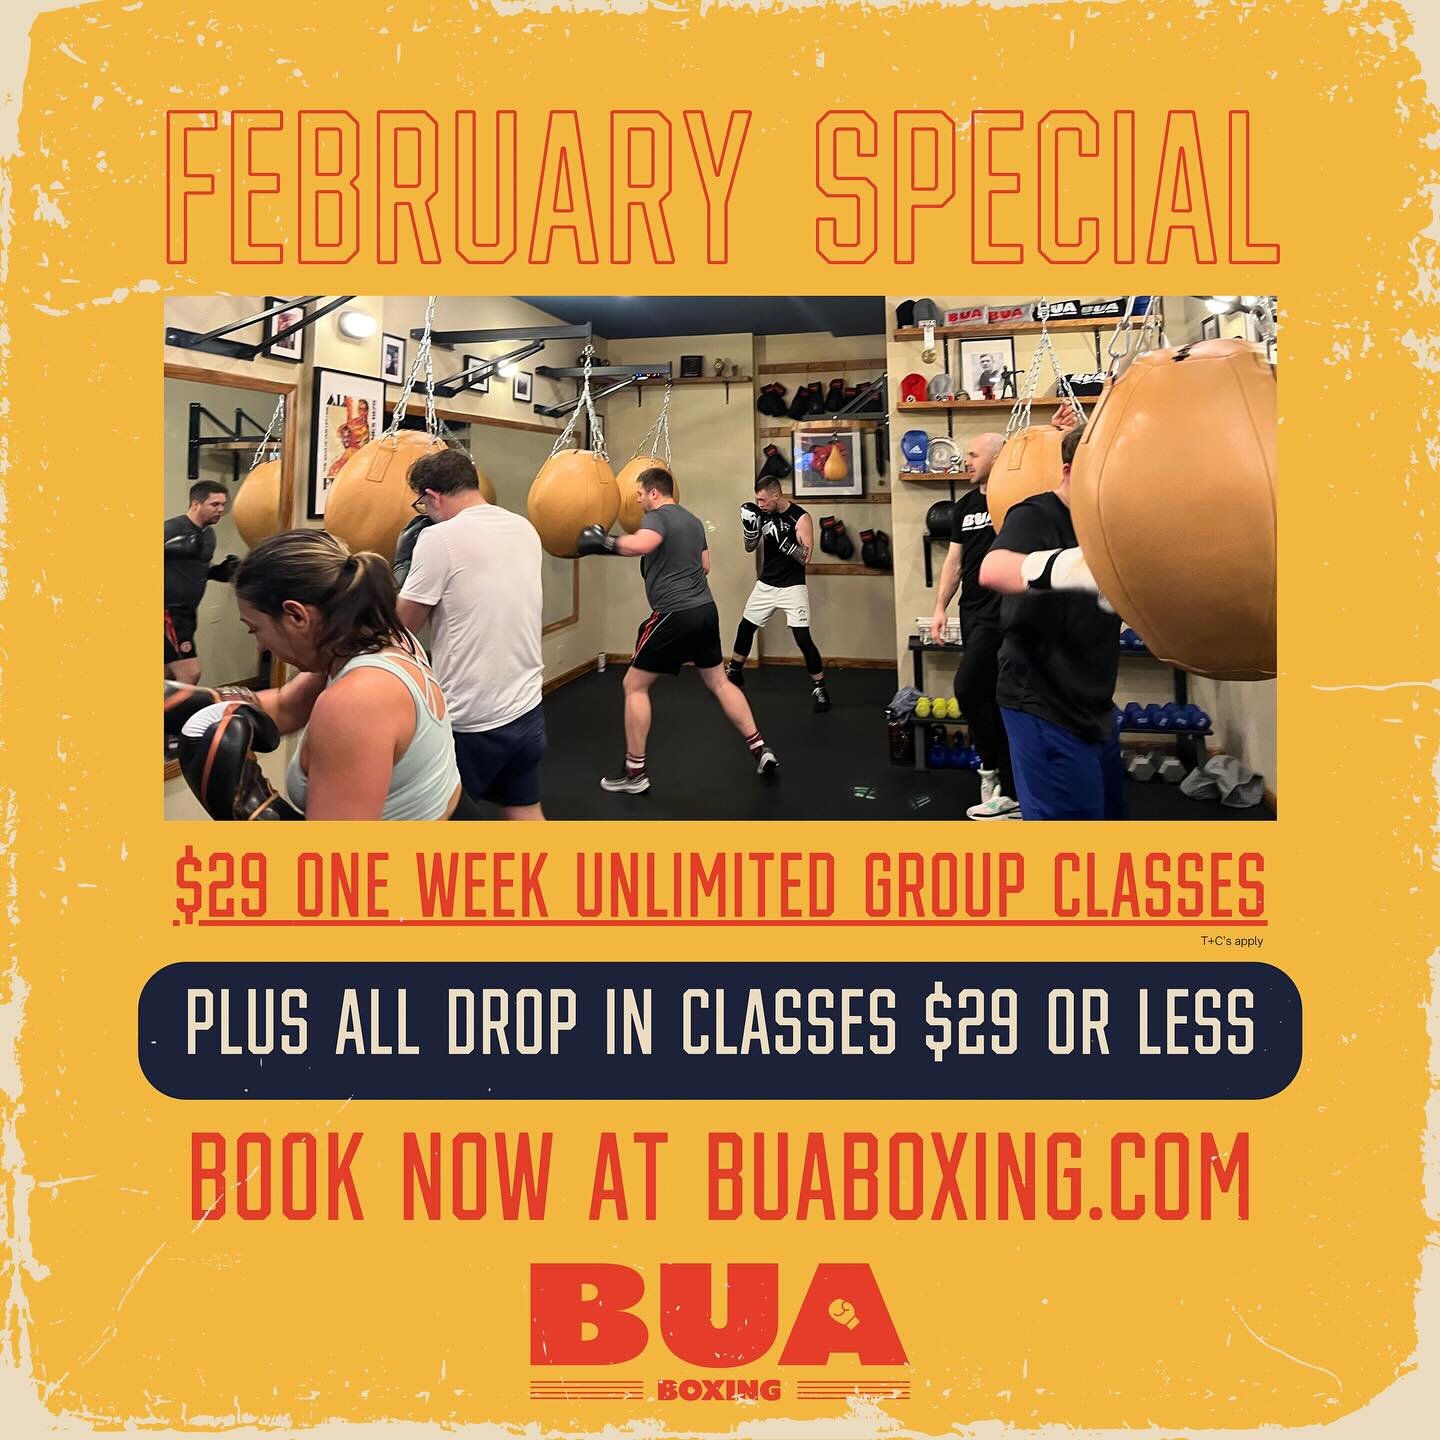 $29 one-week unlimited classes for all new members 🥊💥❗️

All drop-in classes $29 or less 🥊💥

February offers are now live on [buaboxing.com]

_________________________

📍2309 Steinway St. Astoria, NY 11105
💻 buaboxing.com
📩 info@buaboxing.com
